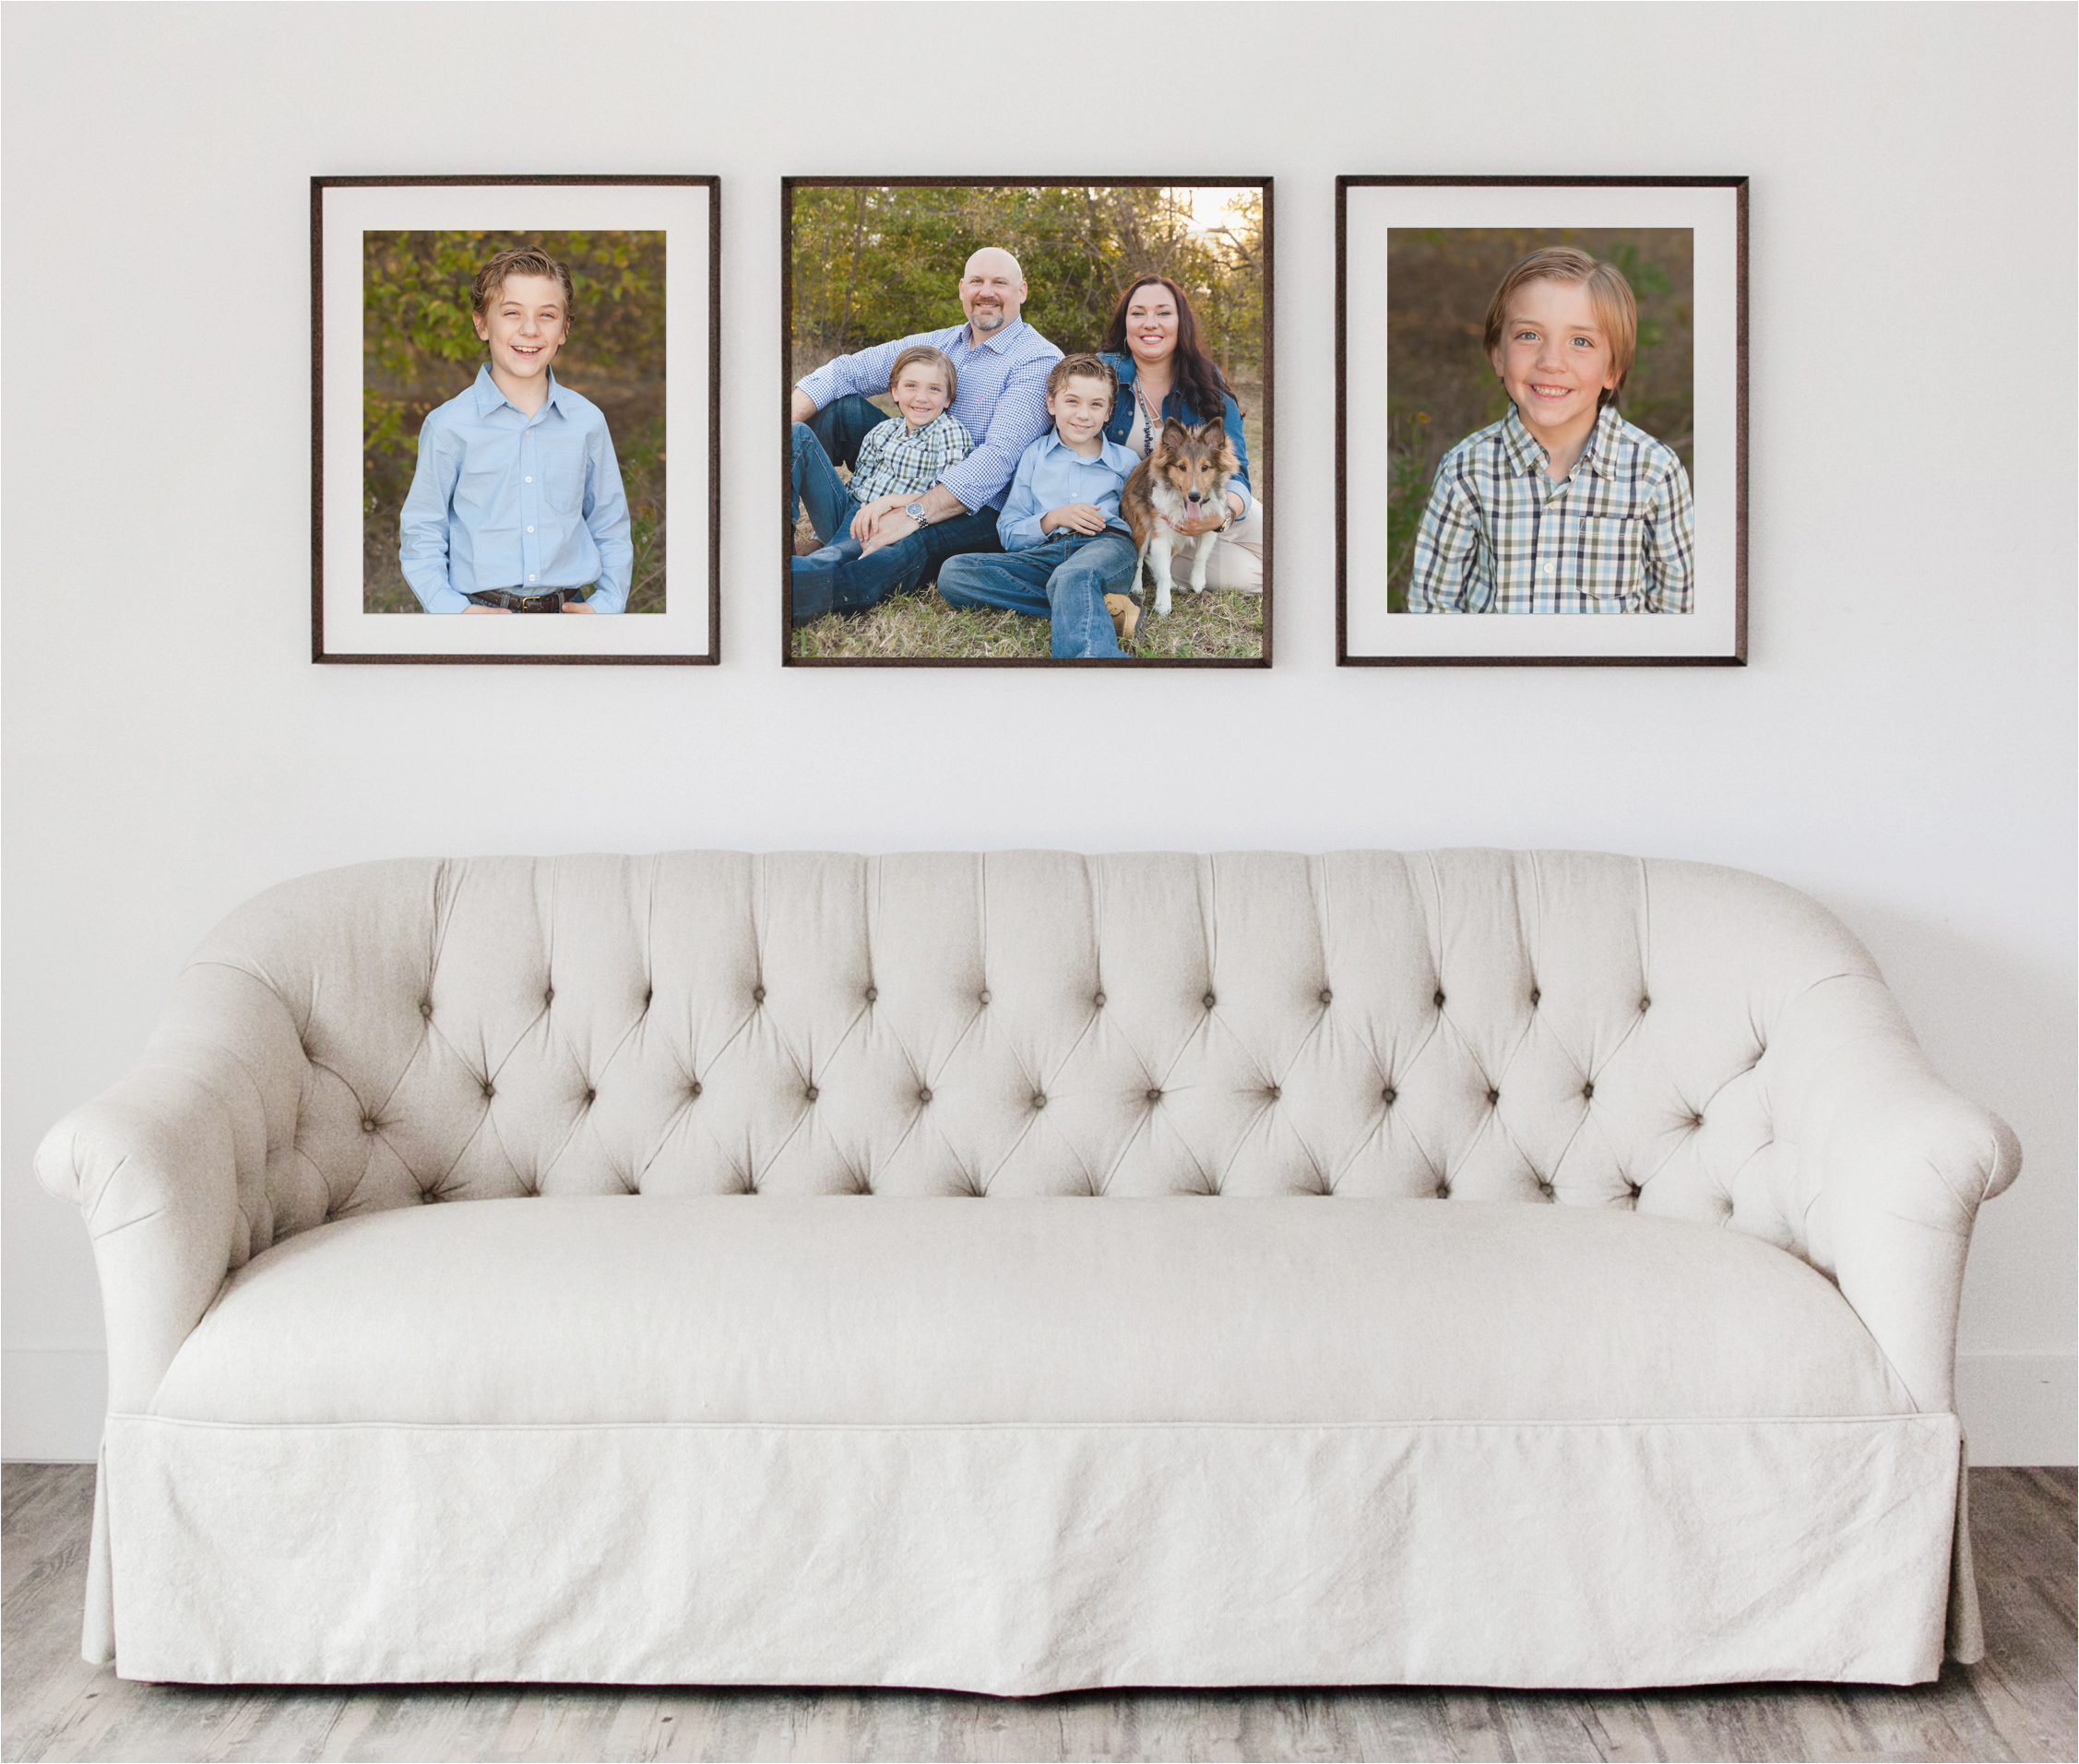 Photo Gallery Design with Frames